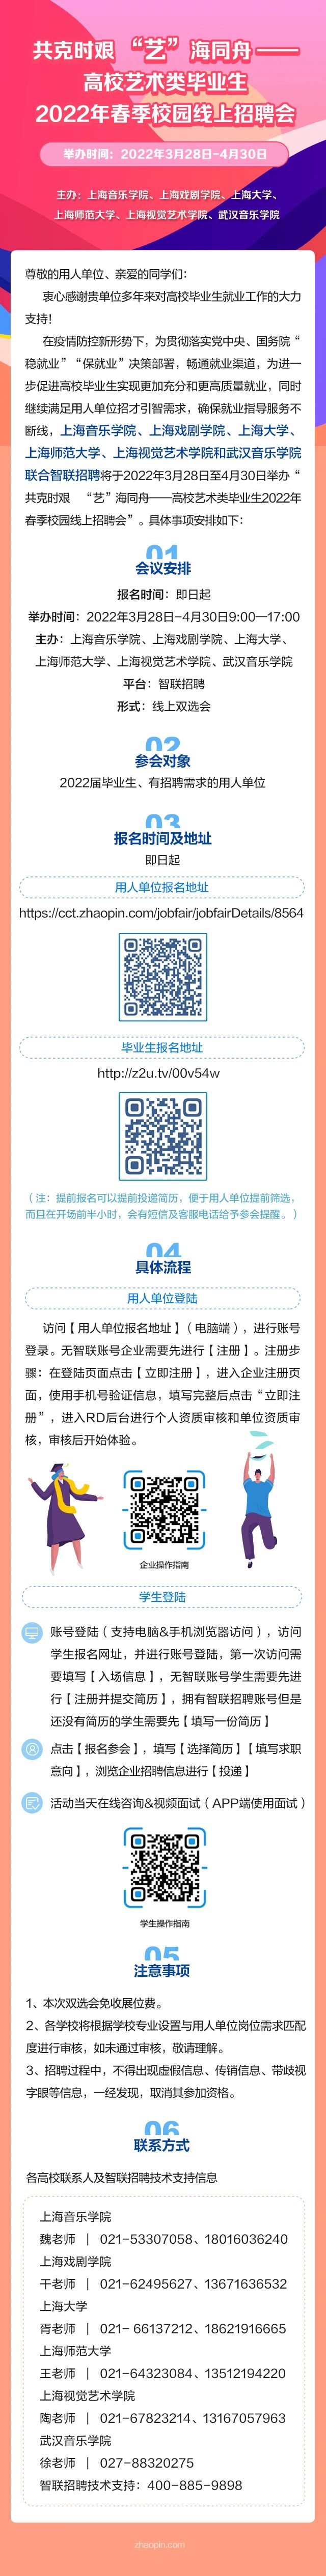 Shangyin Xuegong | Six Schools Joint "Art" Sea in the Same Boat - 2022 Spring Campus Online Job Fair for Art Graduates from Colleges and Universities